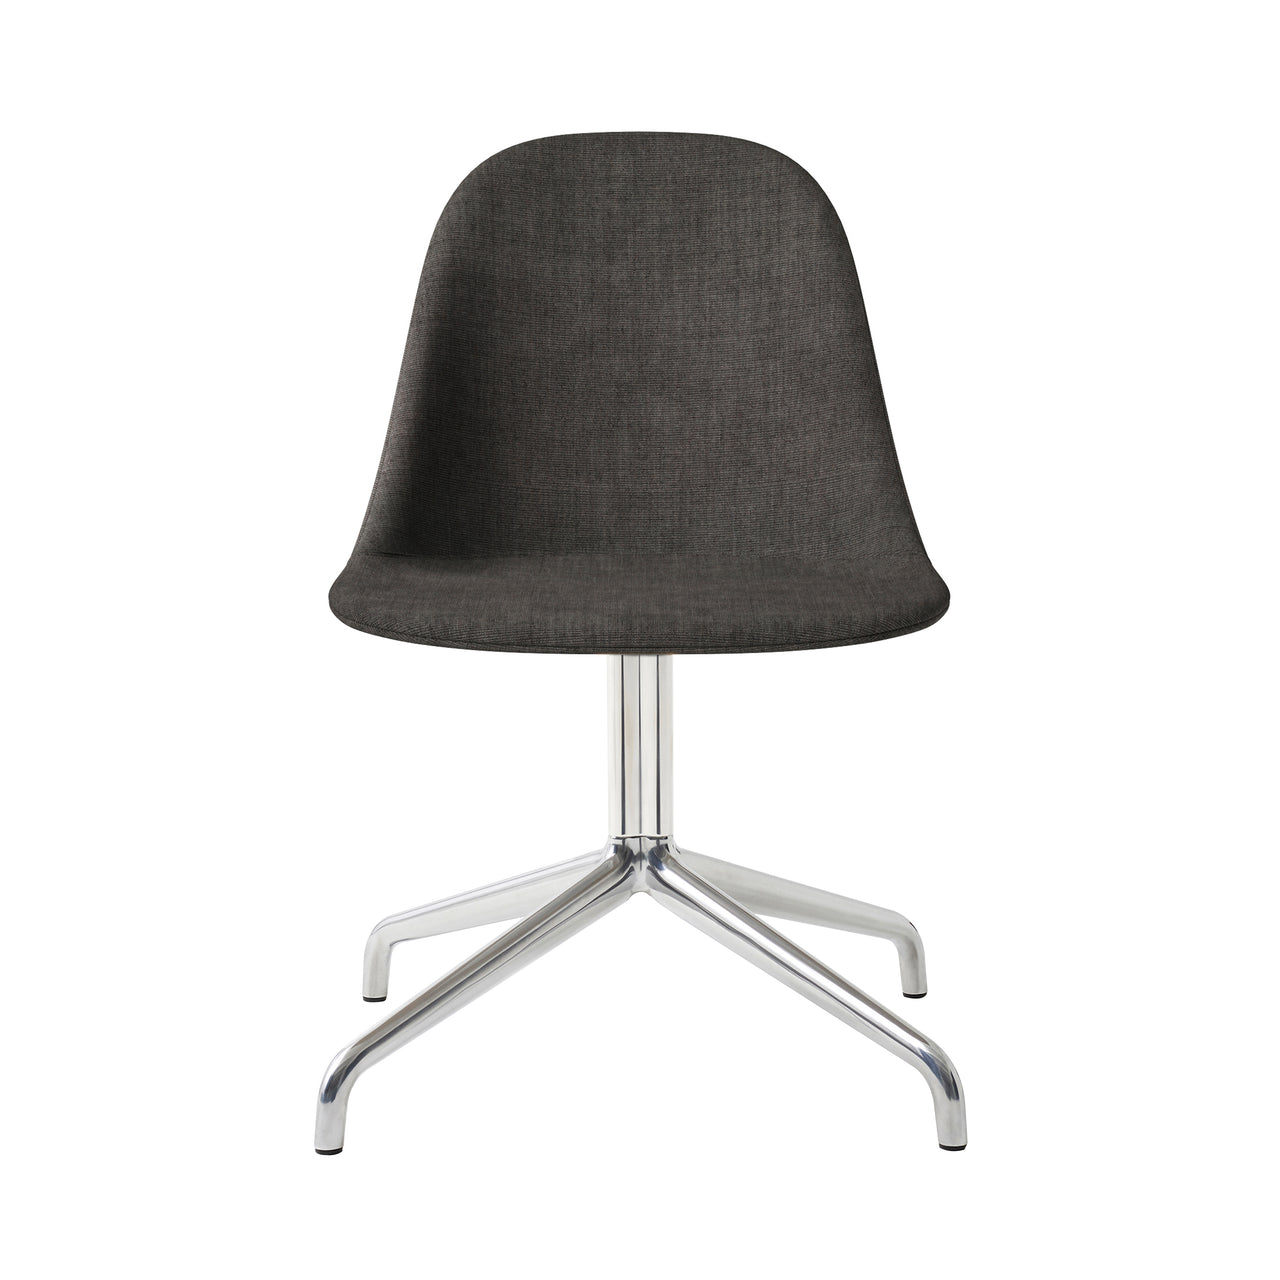 Harbour Swivel Side Chair: Upholstered + Polished Aluminum